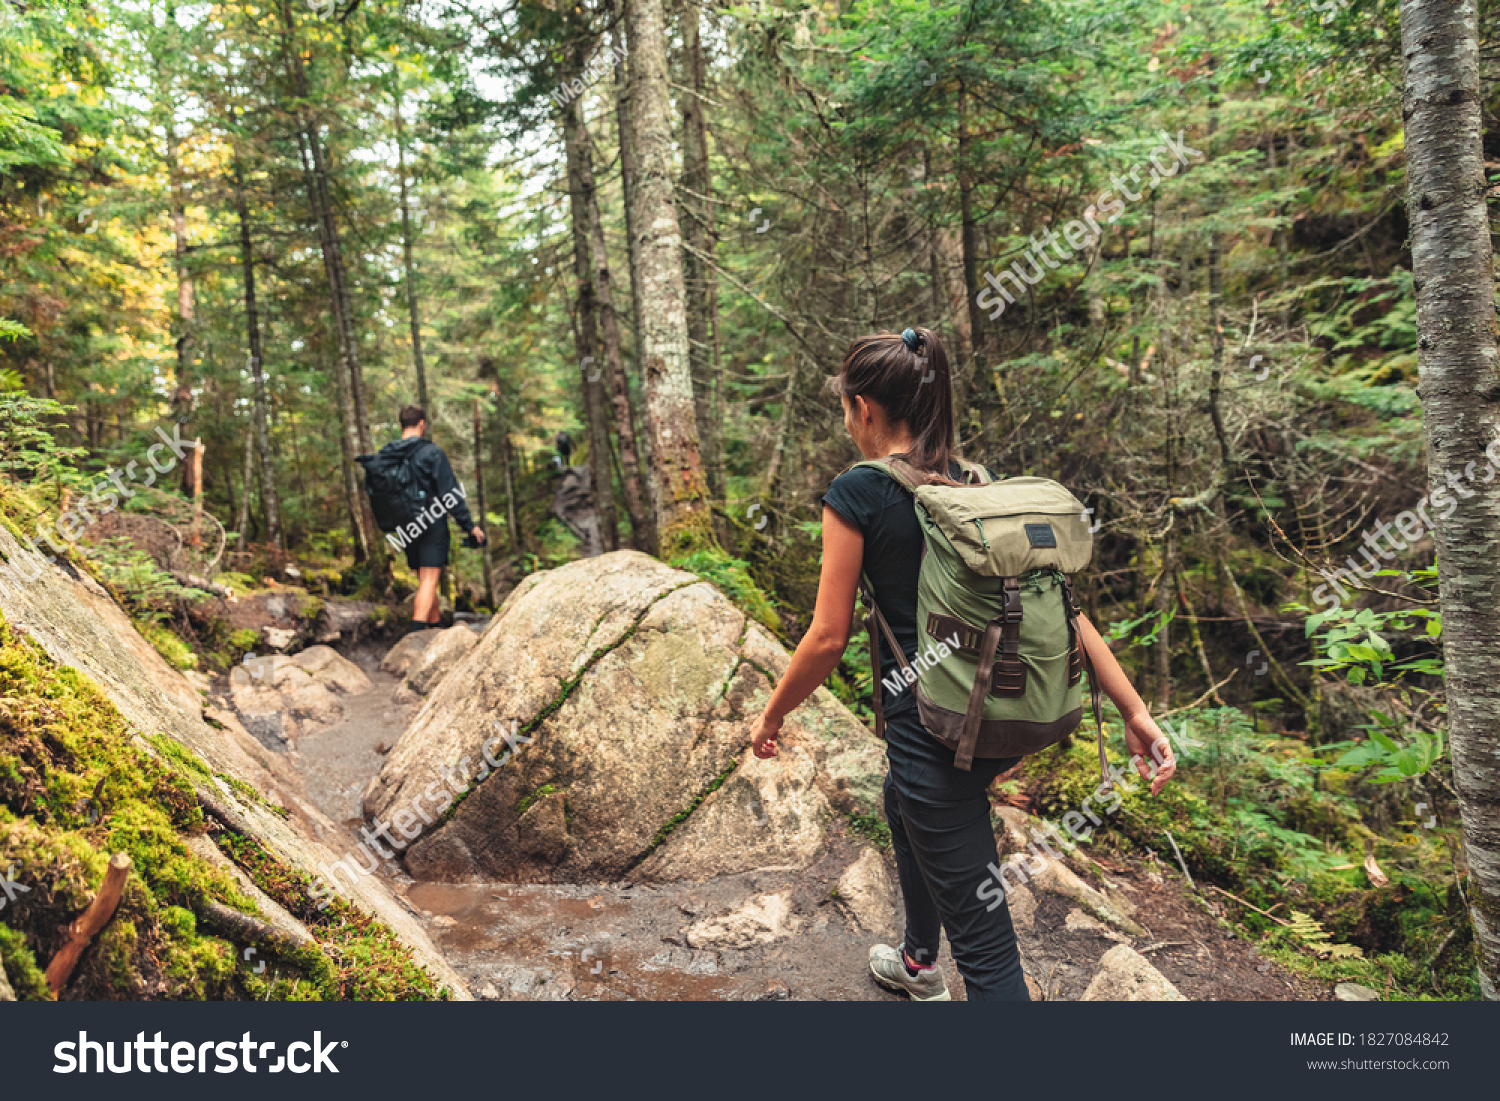 Hikers walking on forest trail with camping backpacks. Hiker woman from behind hiking in autumn fall nature woods. Group of tourists wearing backpacks outdoors trekking on mountain. #1827084842